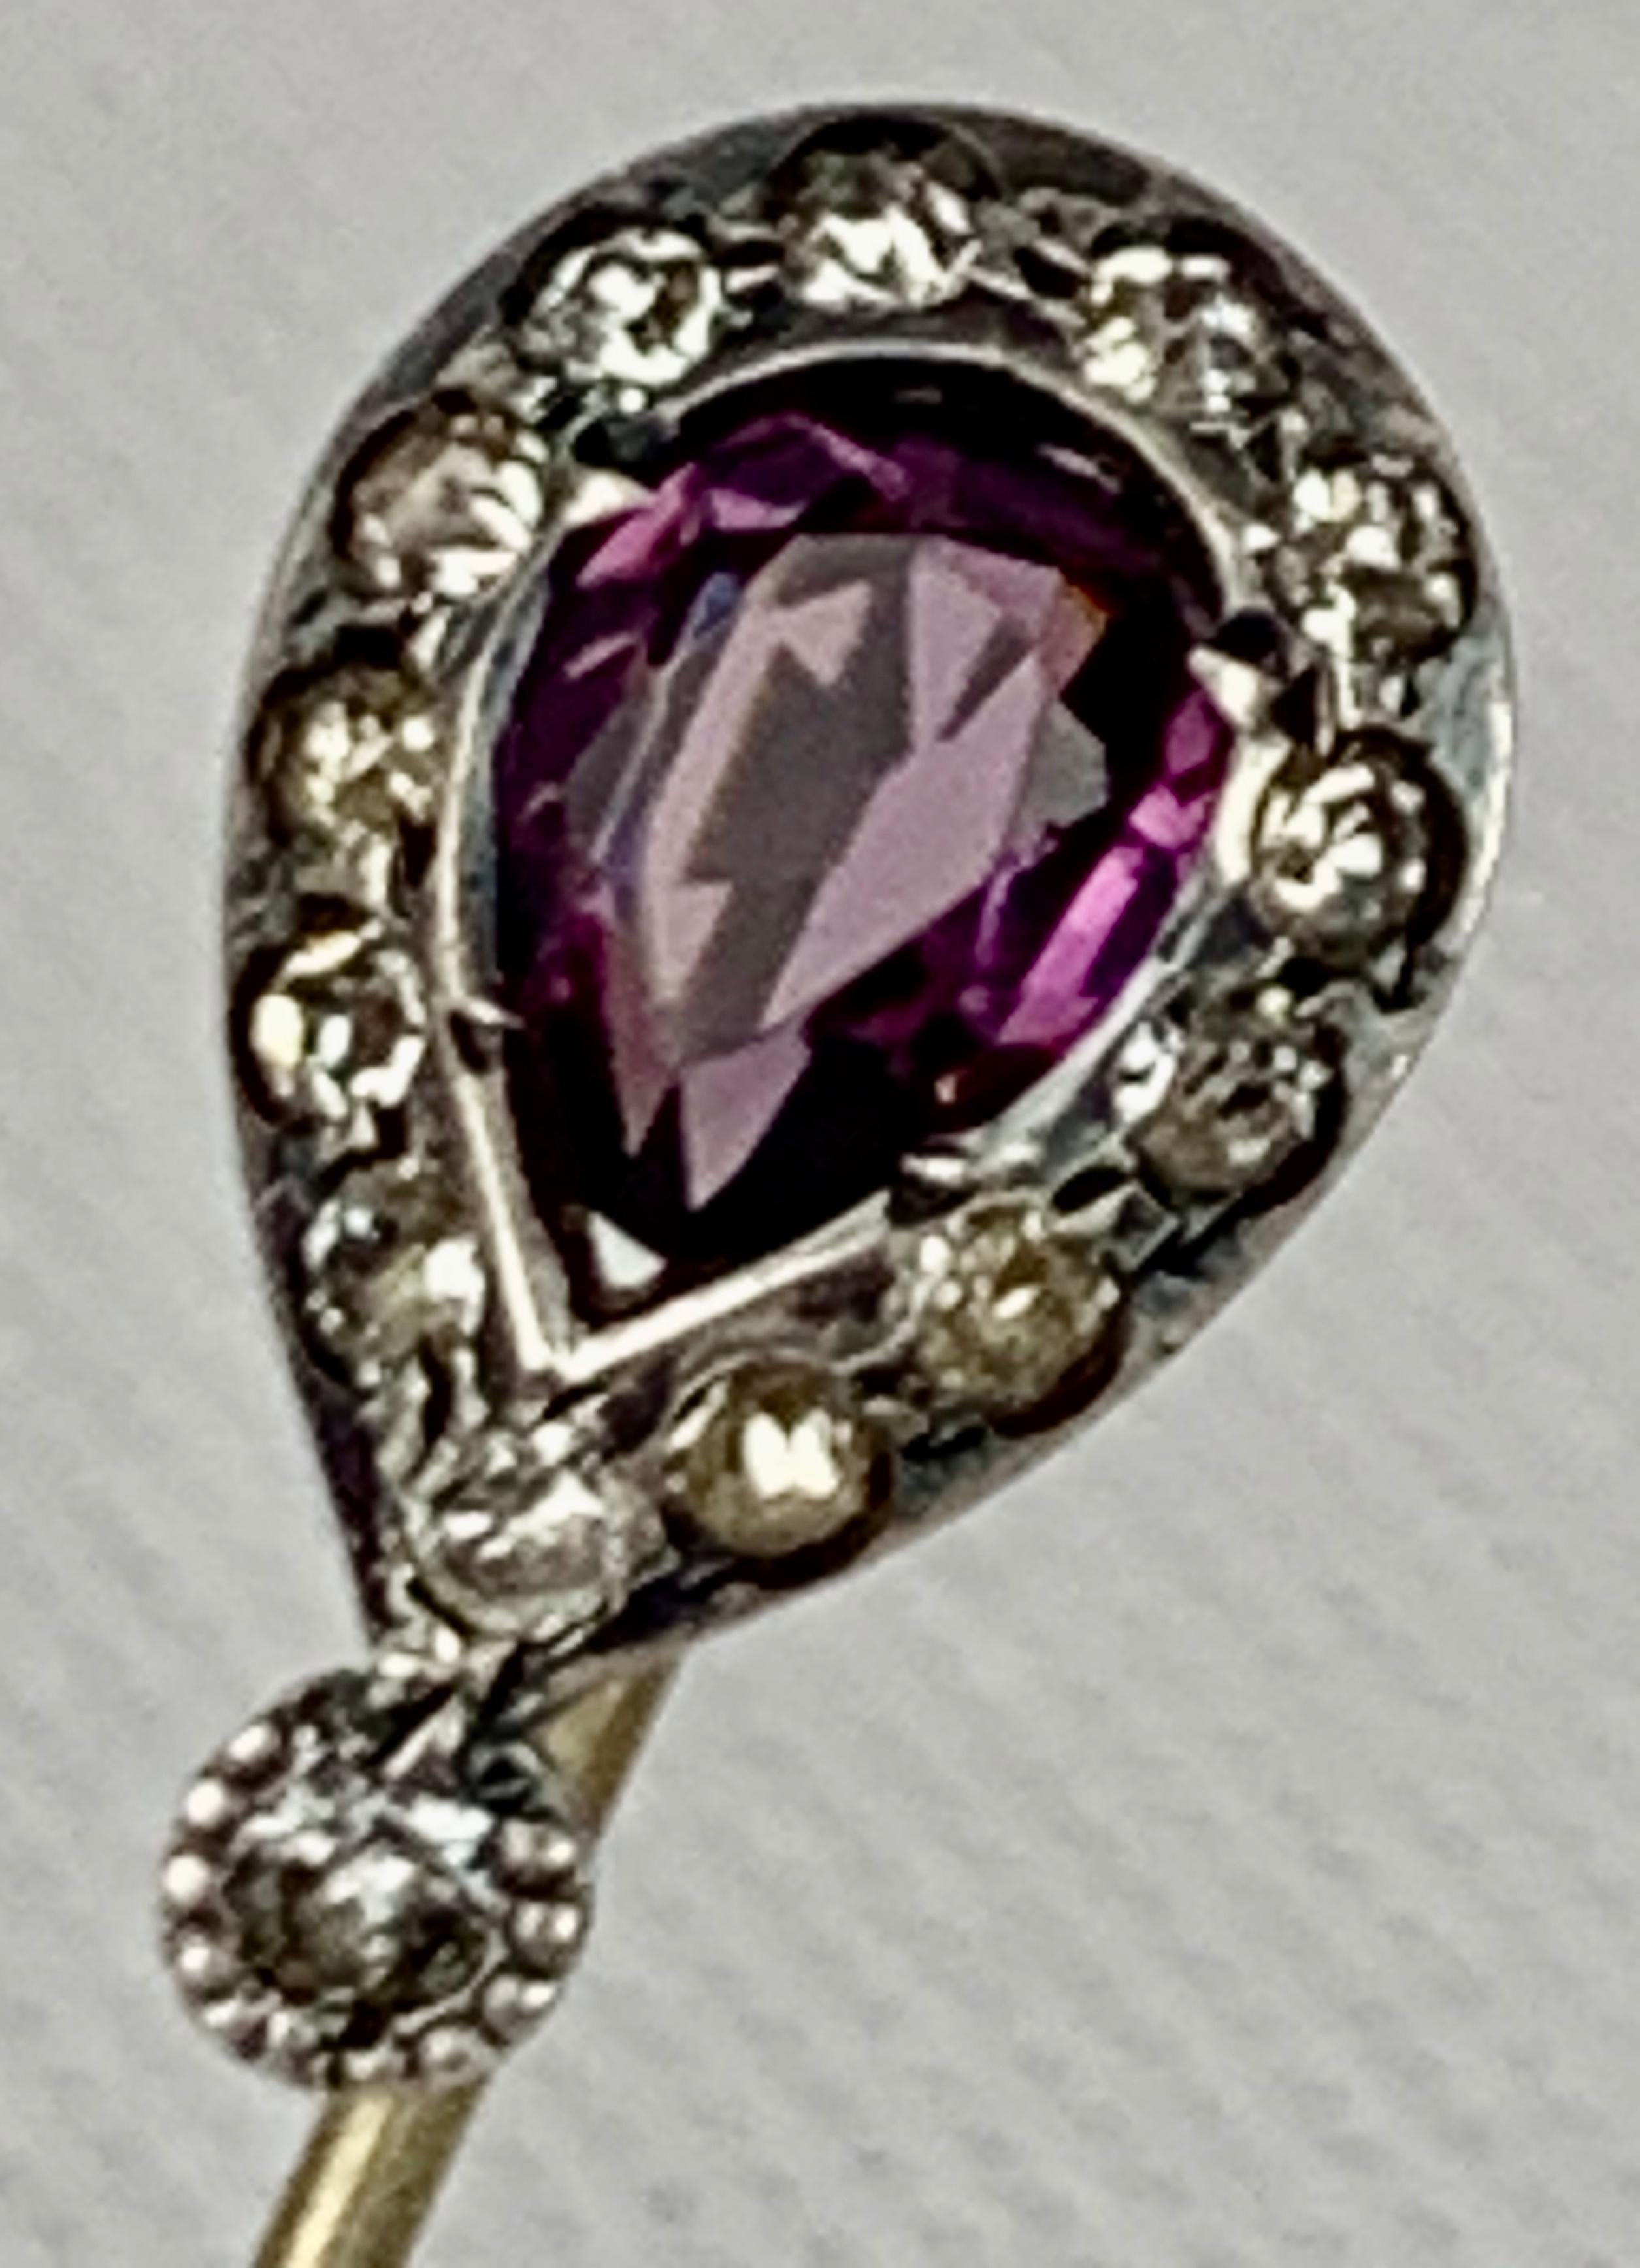 Early nineteenth century English Georgian paste stickpin with a pear shaped amethyst stone.  Originally gentlemen wore these stickpins to hold their cravats in place.  Today it is fun to wear a bit of fashion history.  They can look great on the